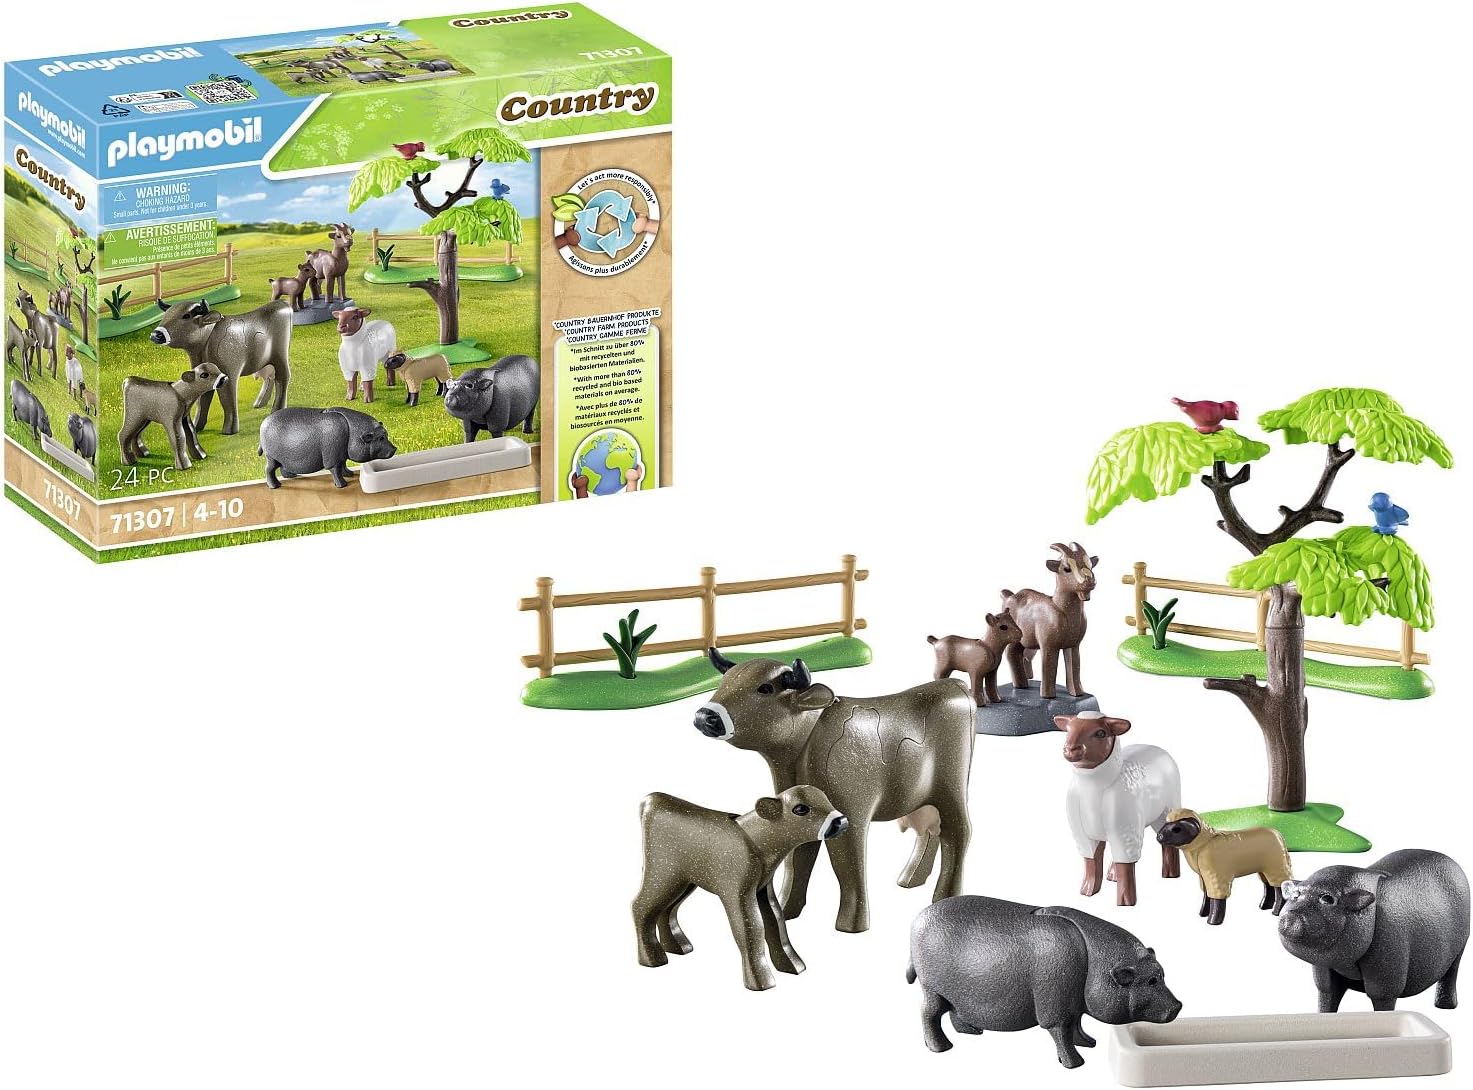 PLAYMOBIL Country 71307 Farm Animals with Lovingly Designed Yard Animals such as Cow, Goat, Sheep and Hanging Belly Pig, Toy for Children from 4 Years